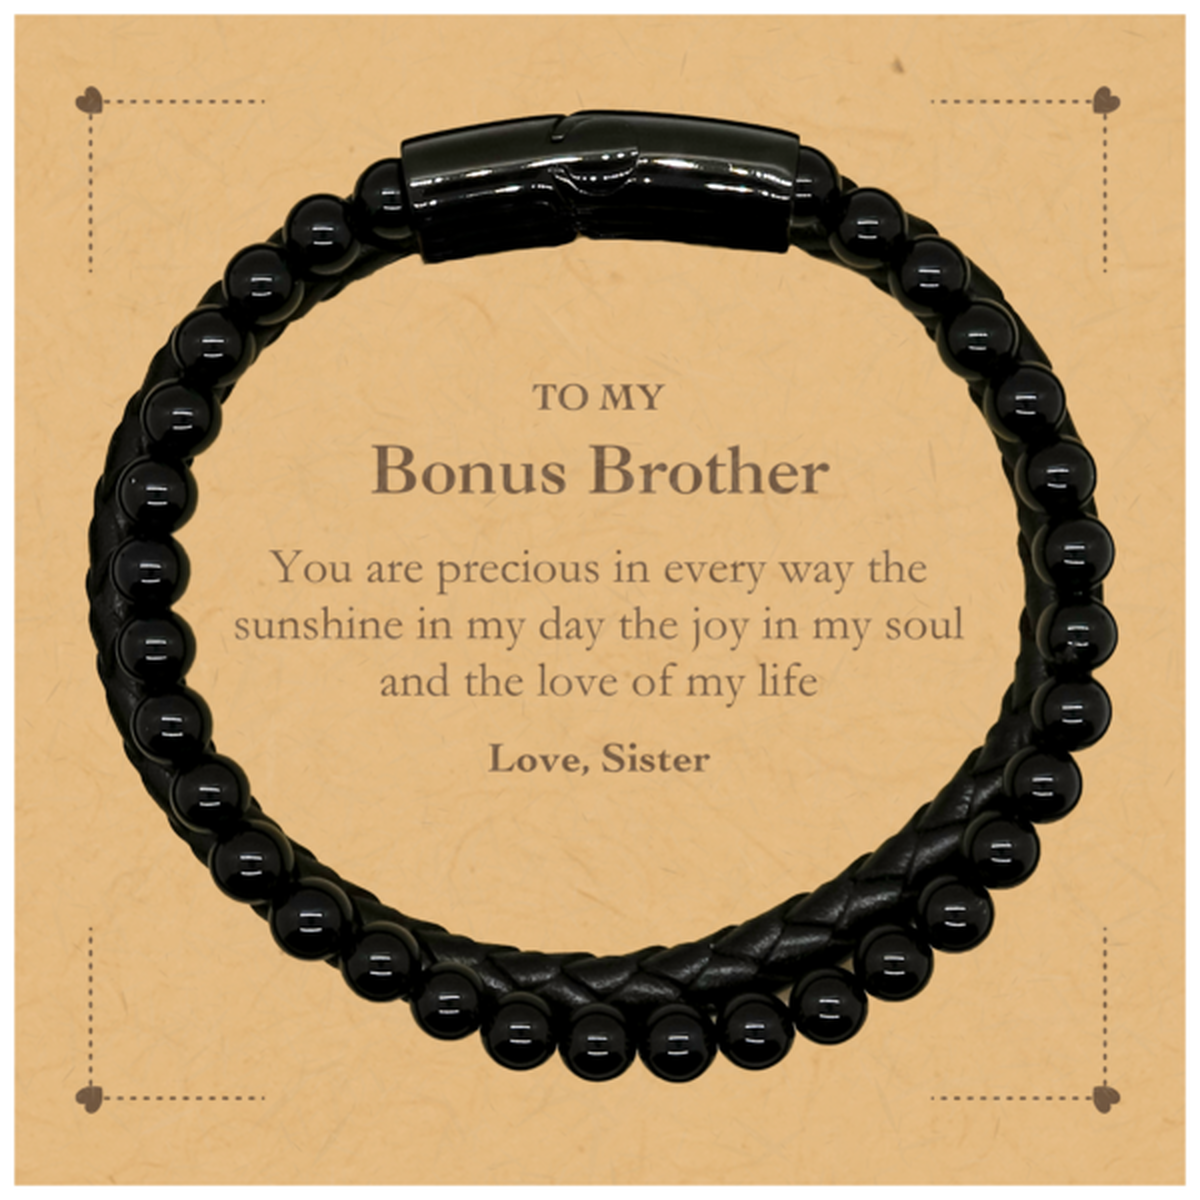 Graduation Gifts for Bonus Brother Stone Leather Bracelets Present from Sister, Christmas Bonus Brother Birthday Gifts Bonus Brother You are precious in every way the sunshine in my day. Love, Sister